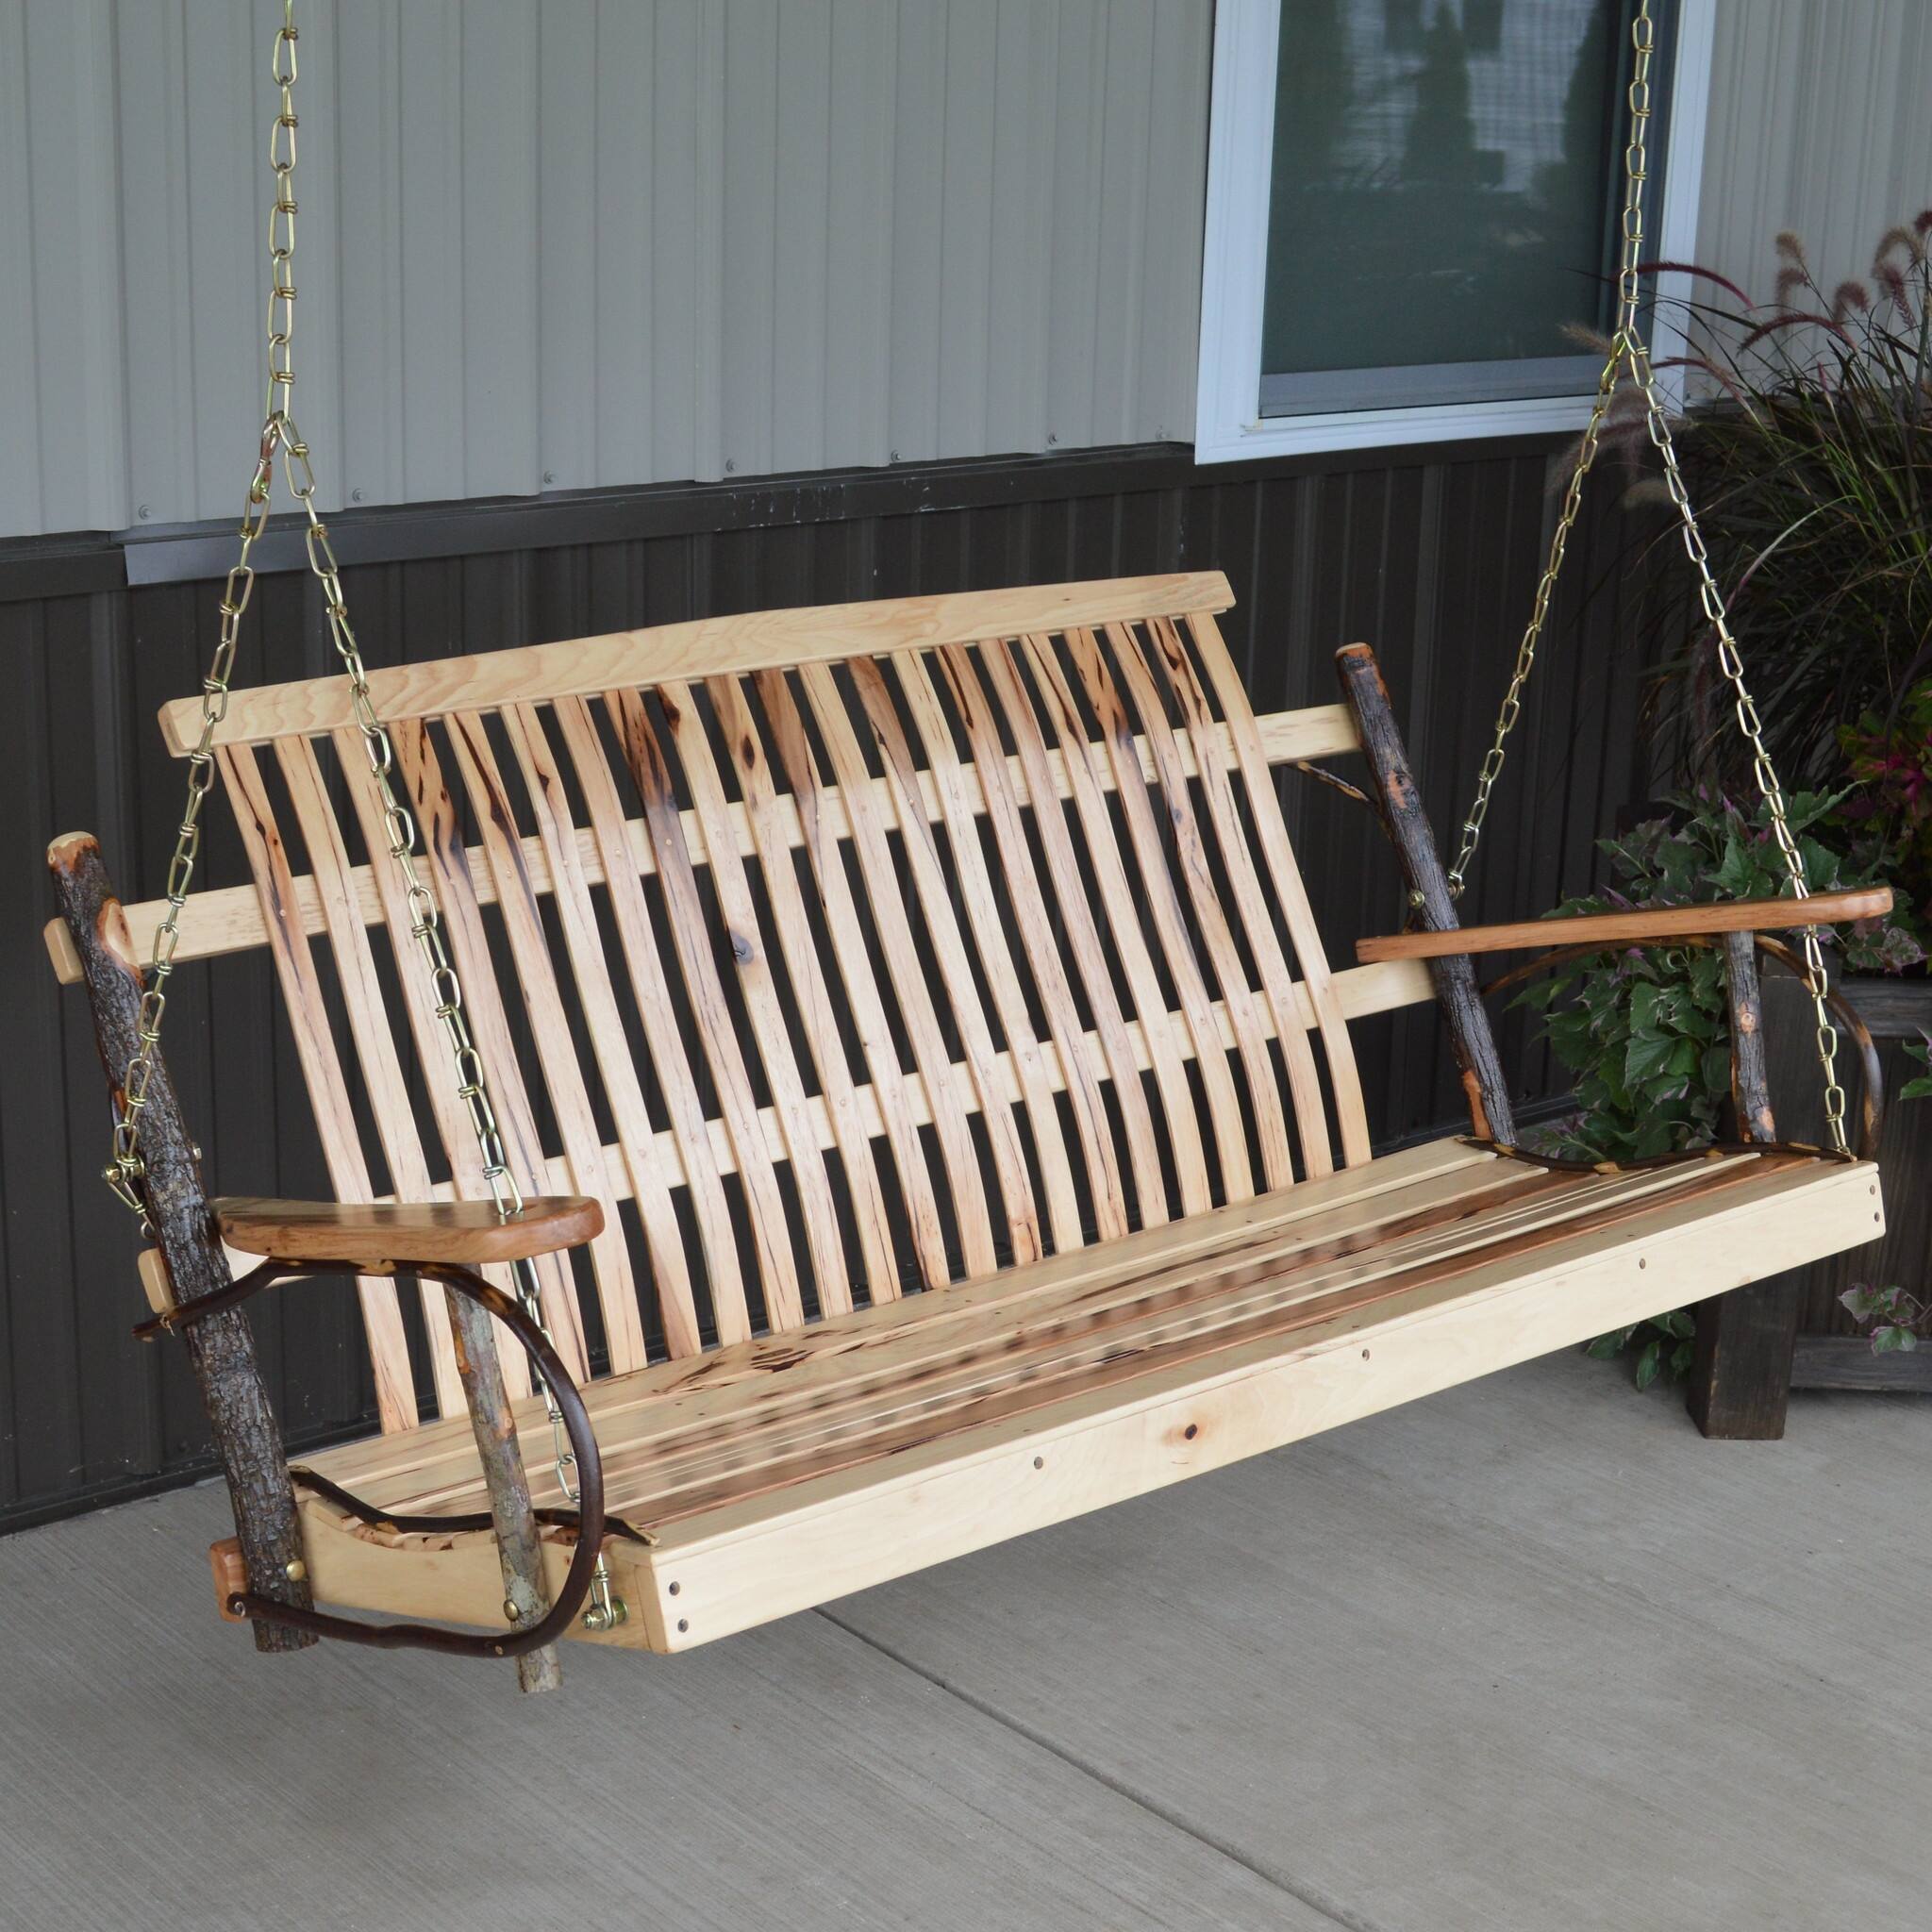 Hickory Porch Swing with Chains - Bed Bath & Beyond - 34616938